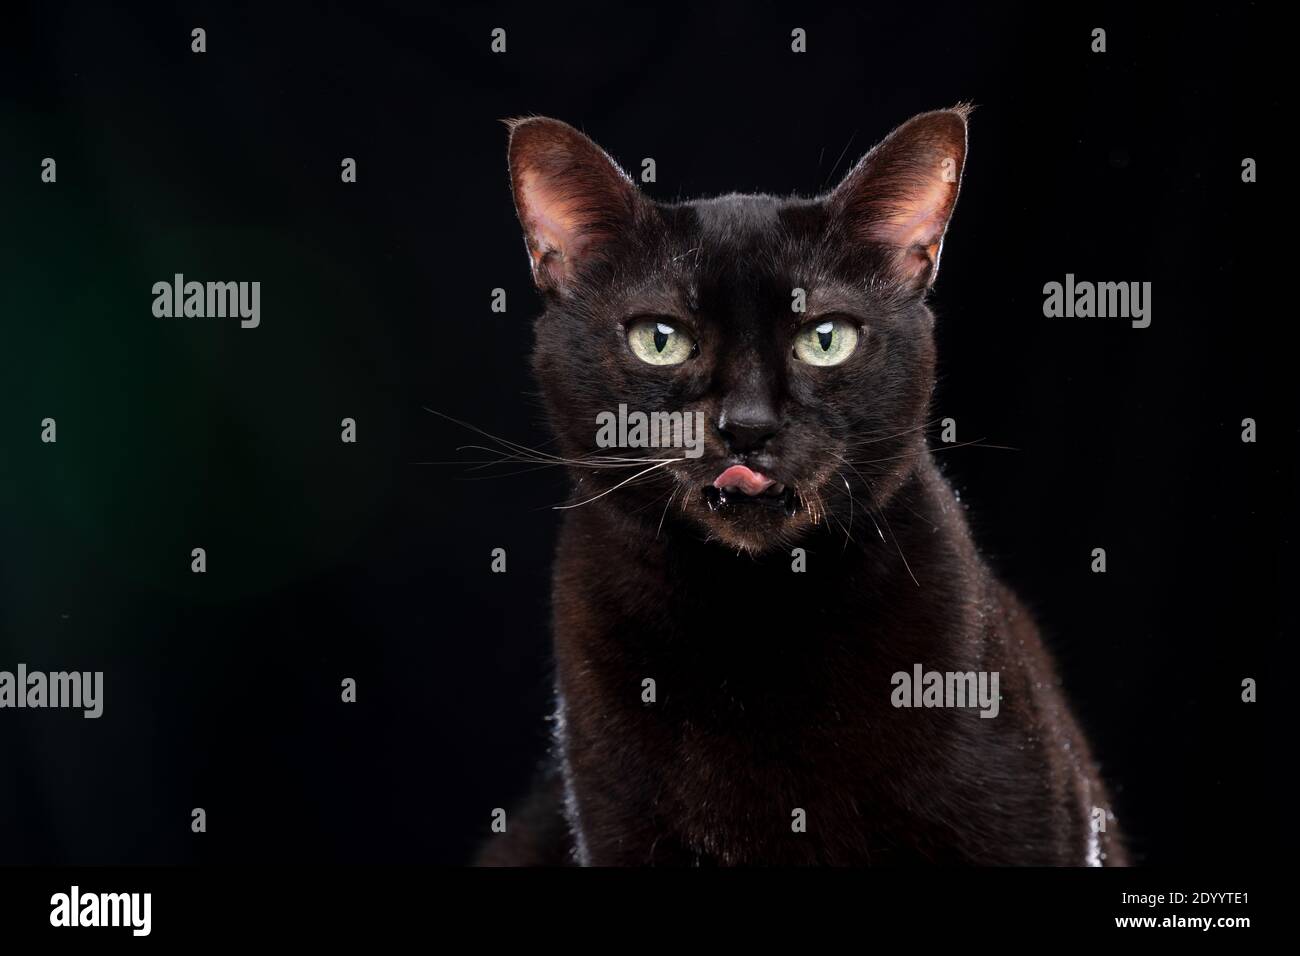 black cat licking lips on black background with green lens flare Stock Photo